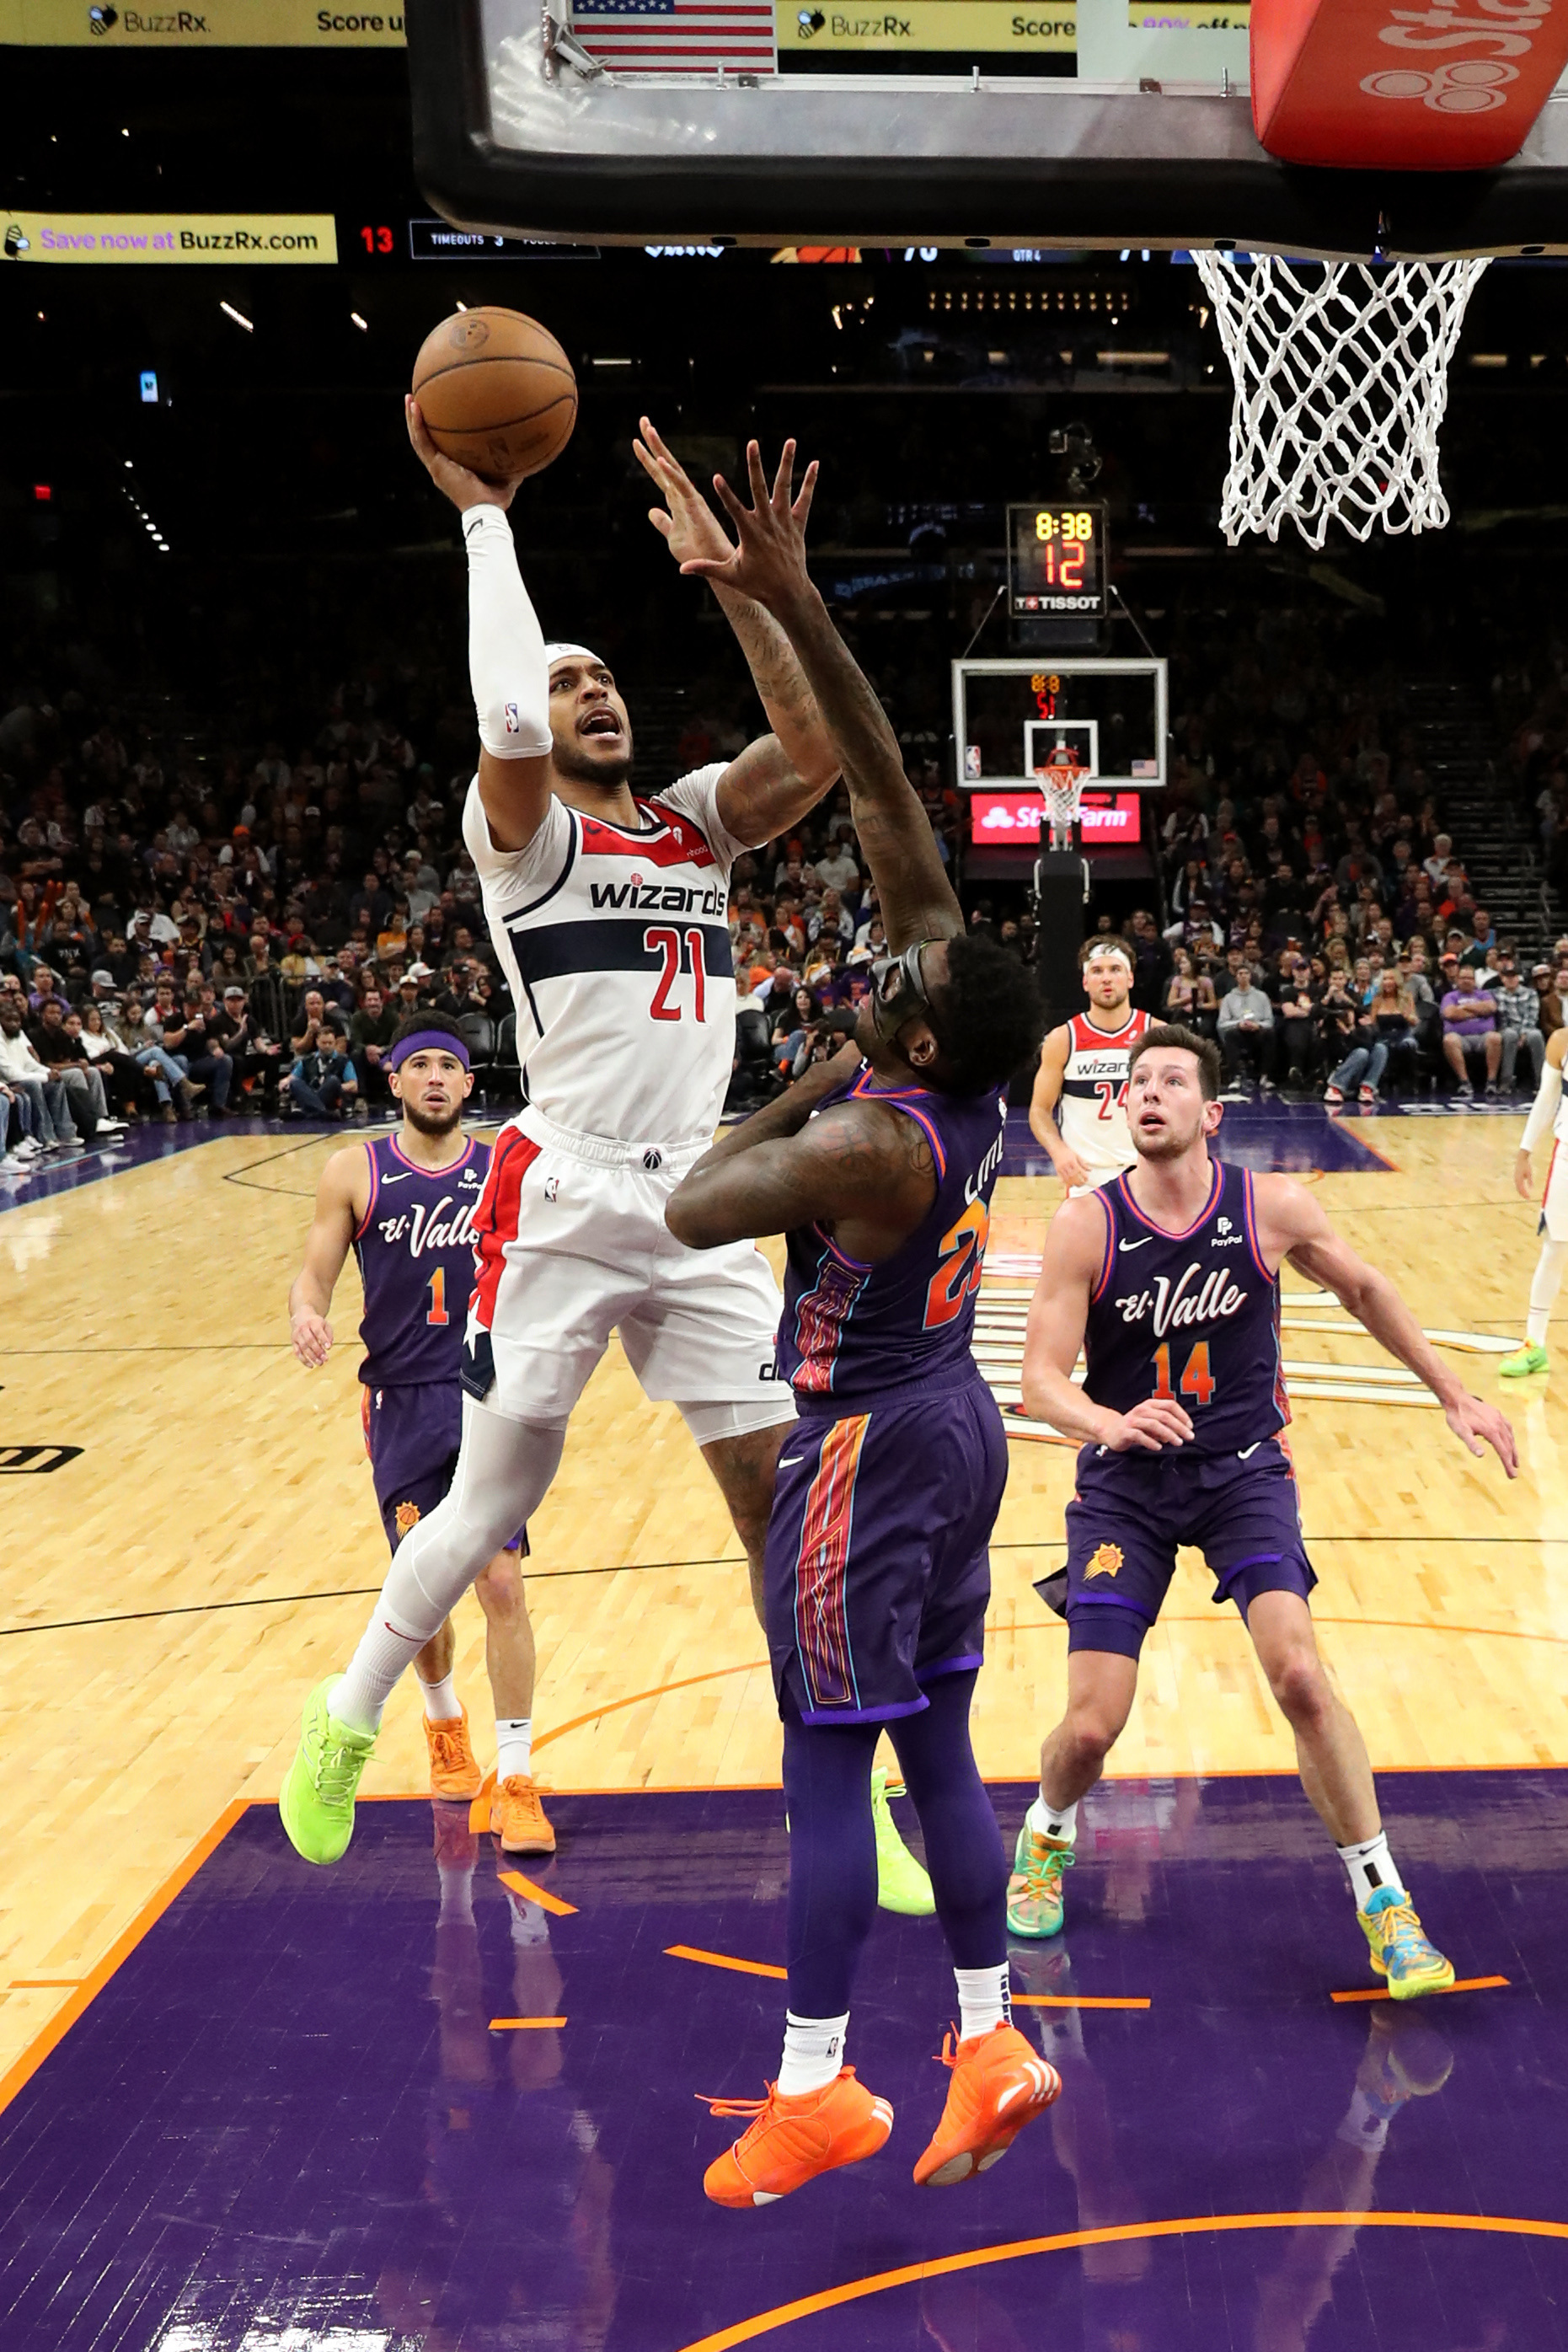 Suns rally from 16-point deficit, upend Wizards | Reuters